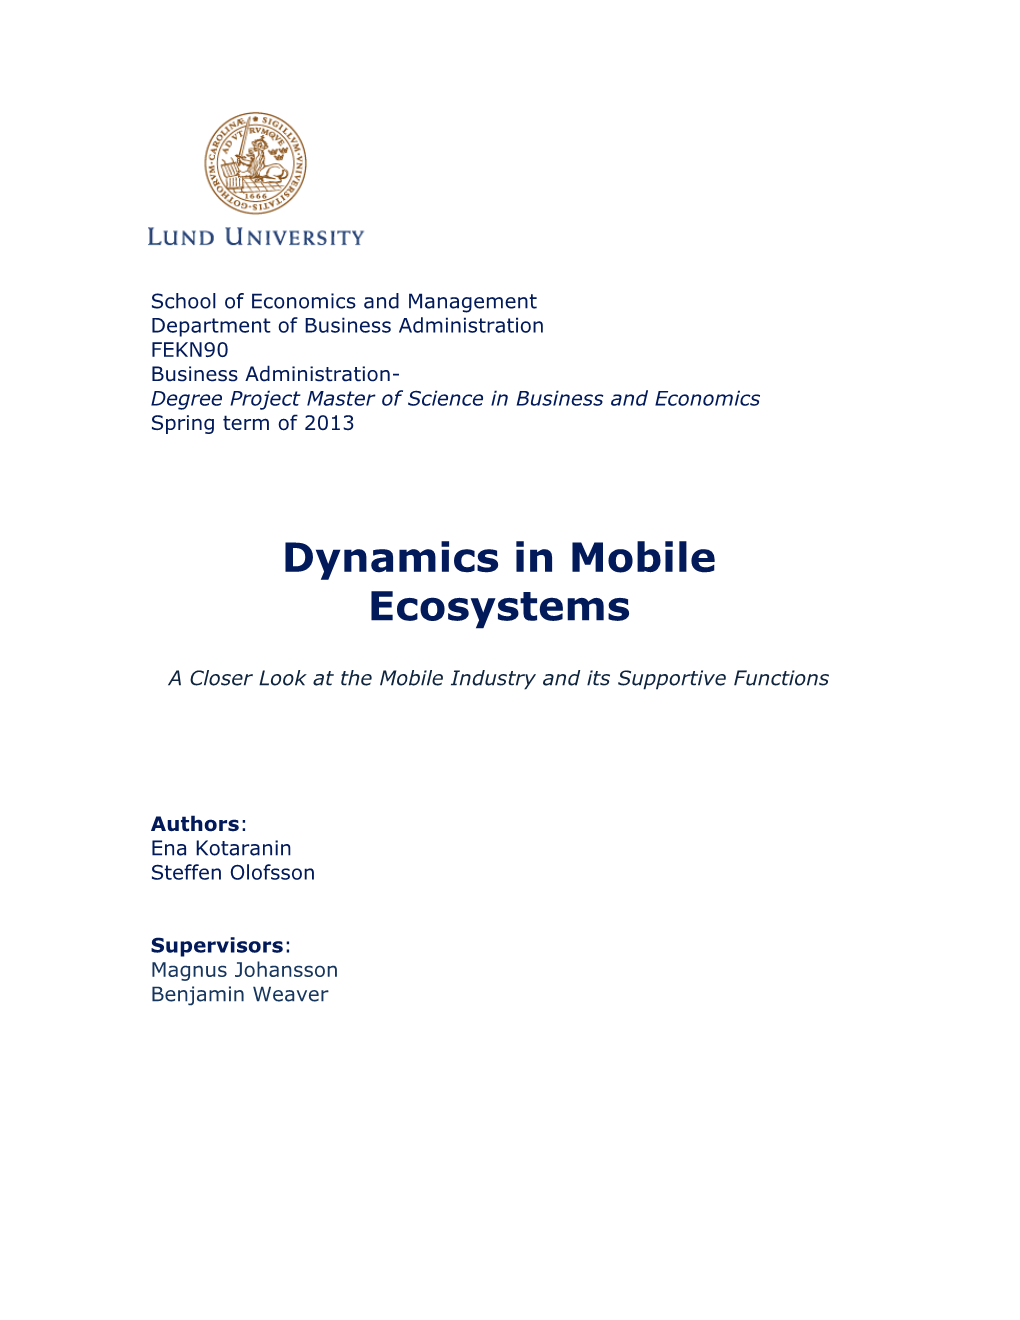 Dynamics in Mobile Ecosystems